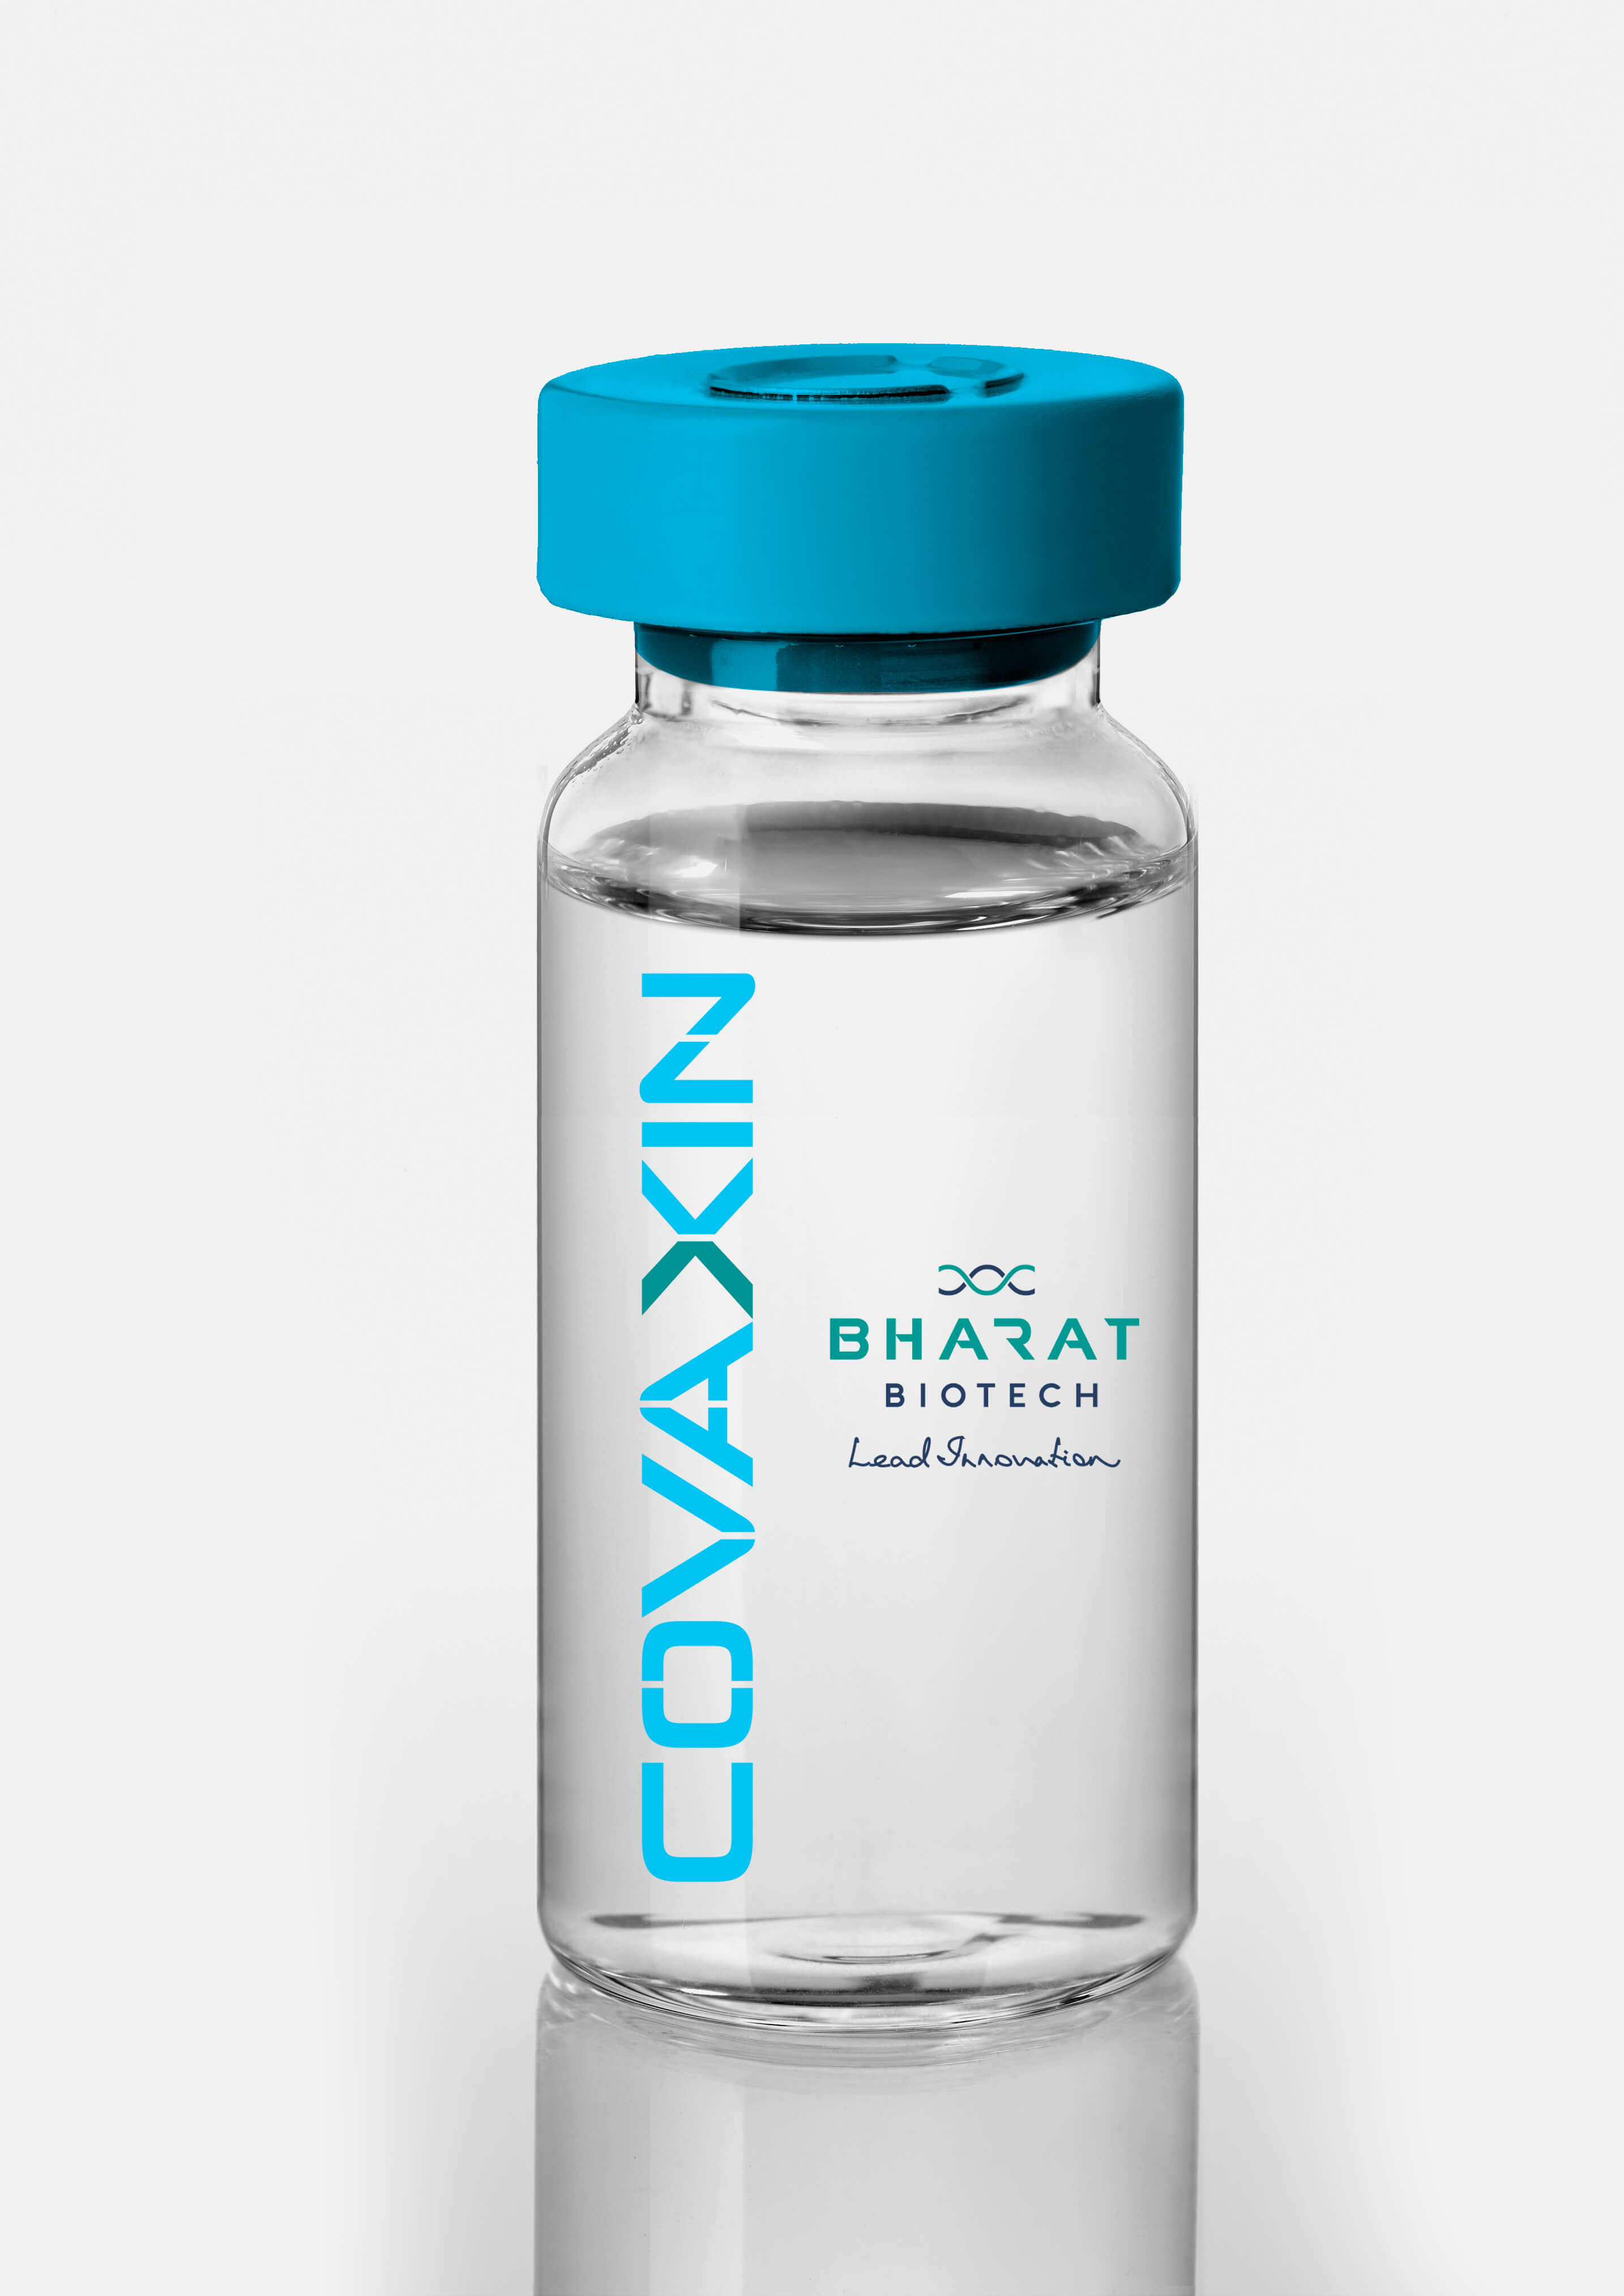 COVAXIN production to be doubled under Mission COVID Suraksha